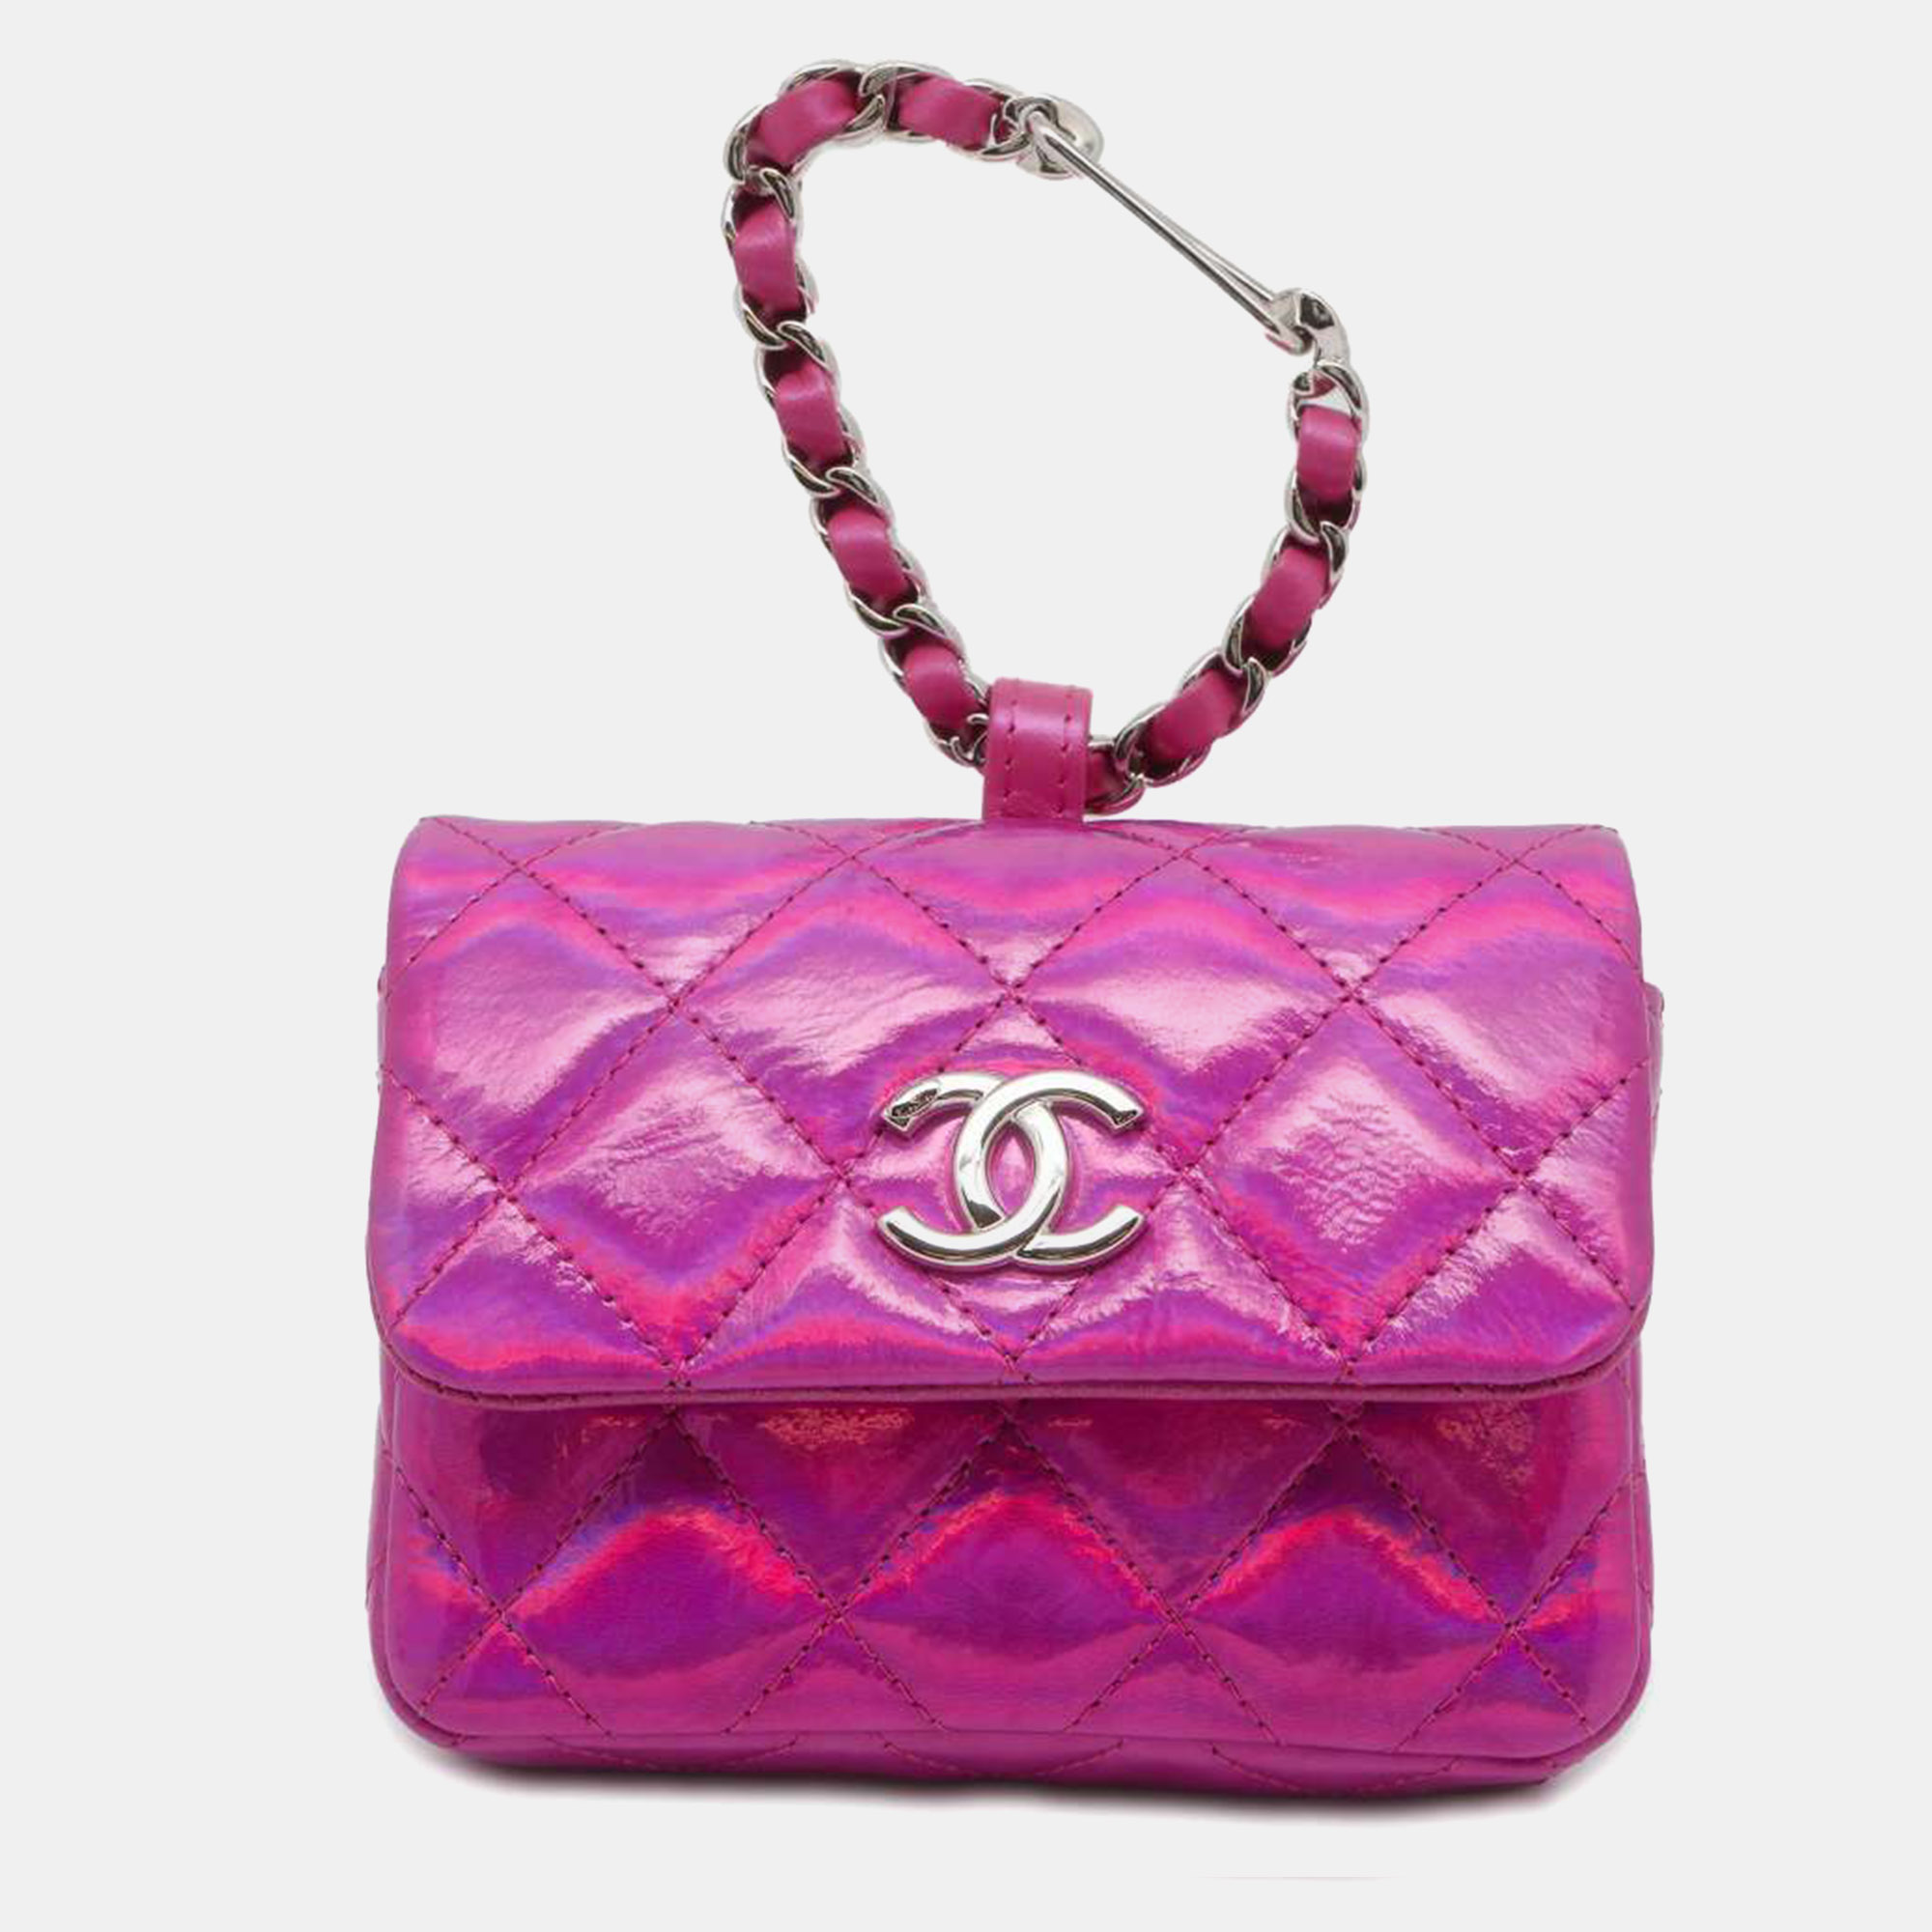 Chanel pink patent lambskin leather quilted hook card holder